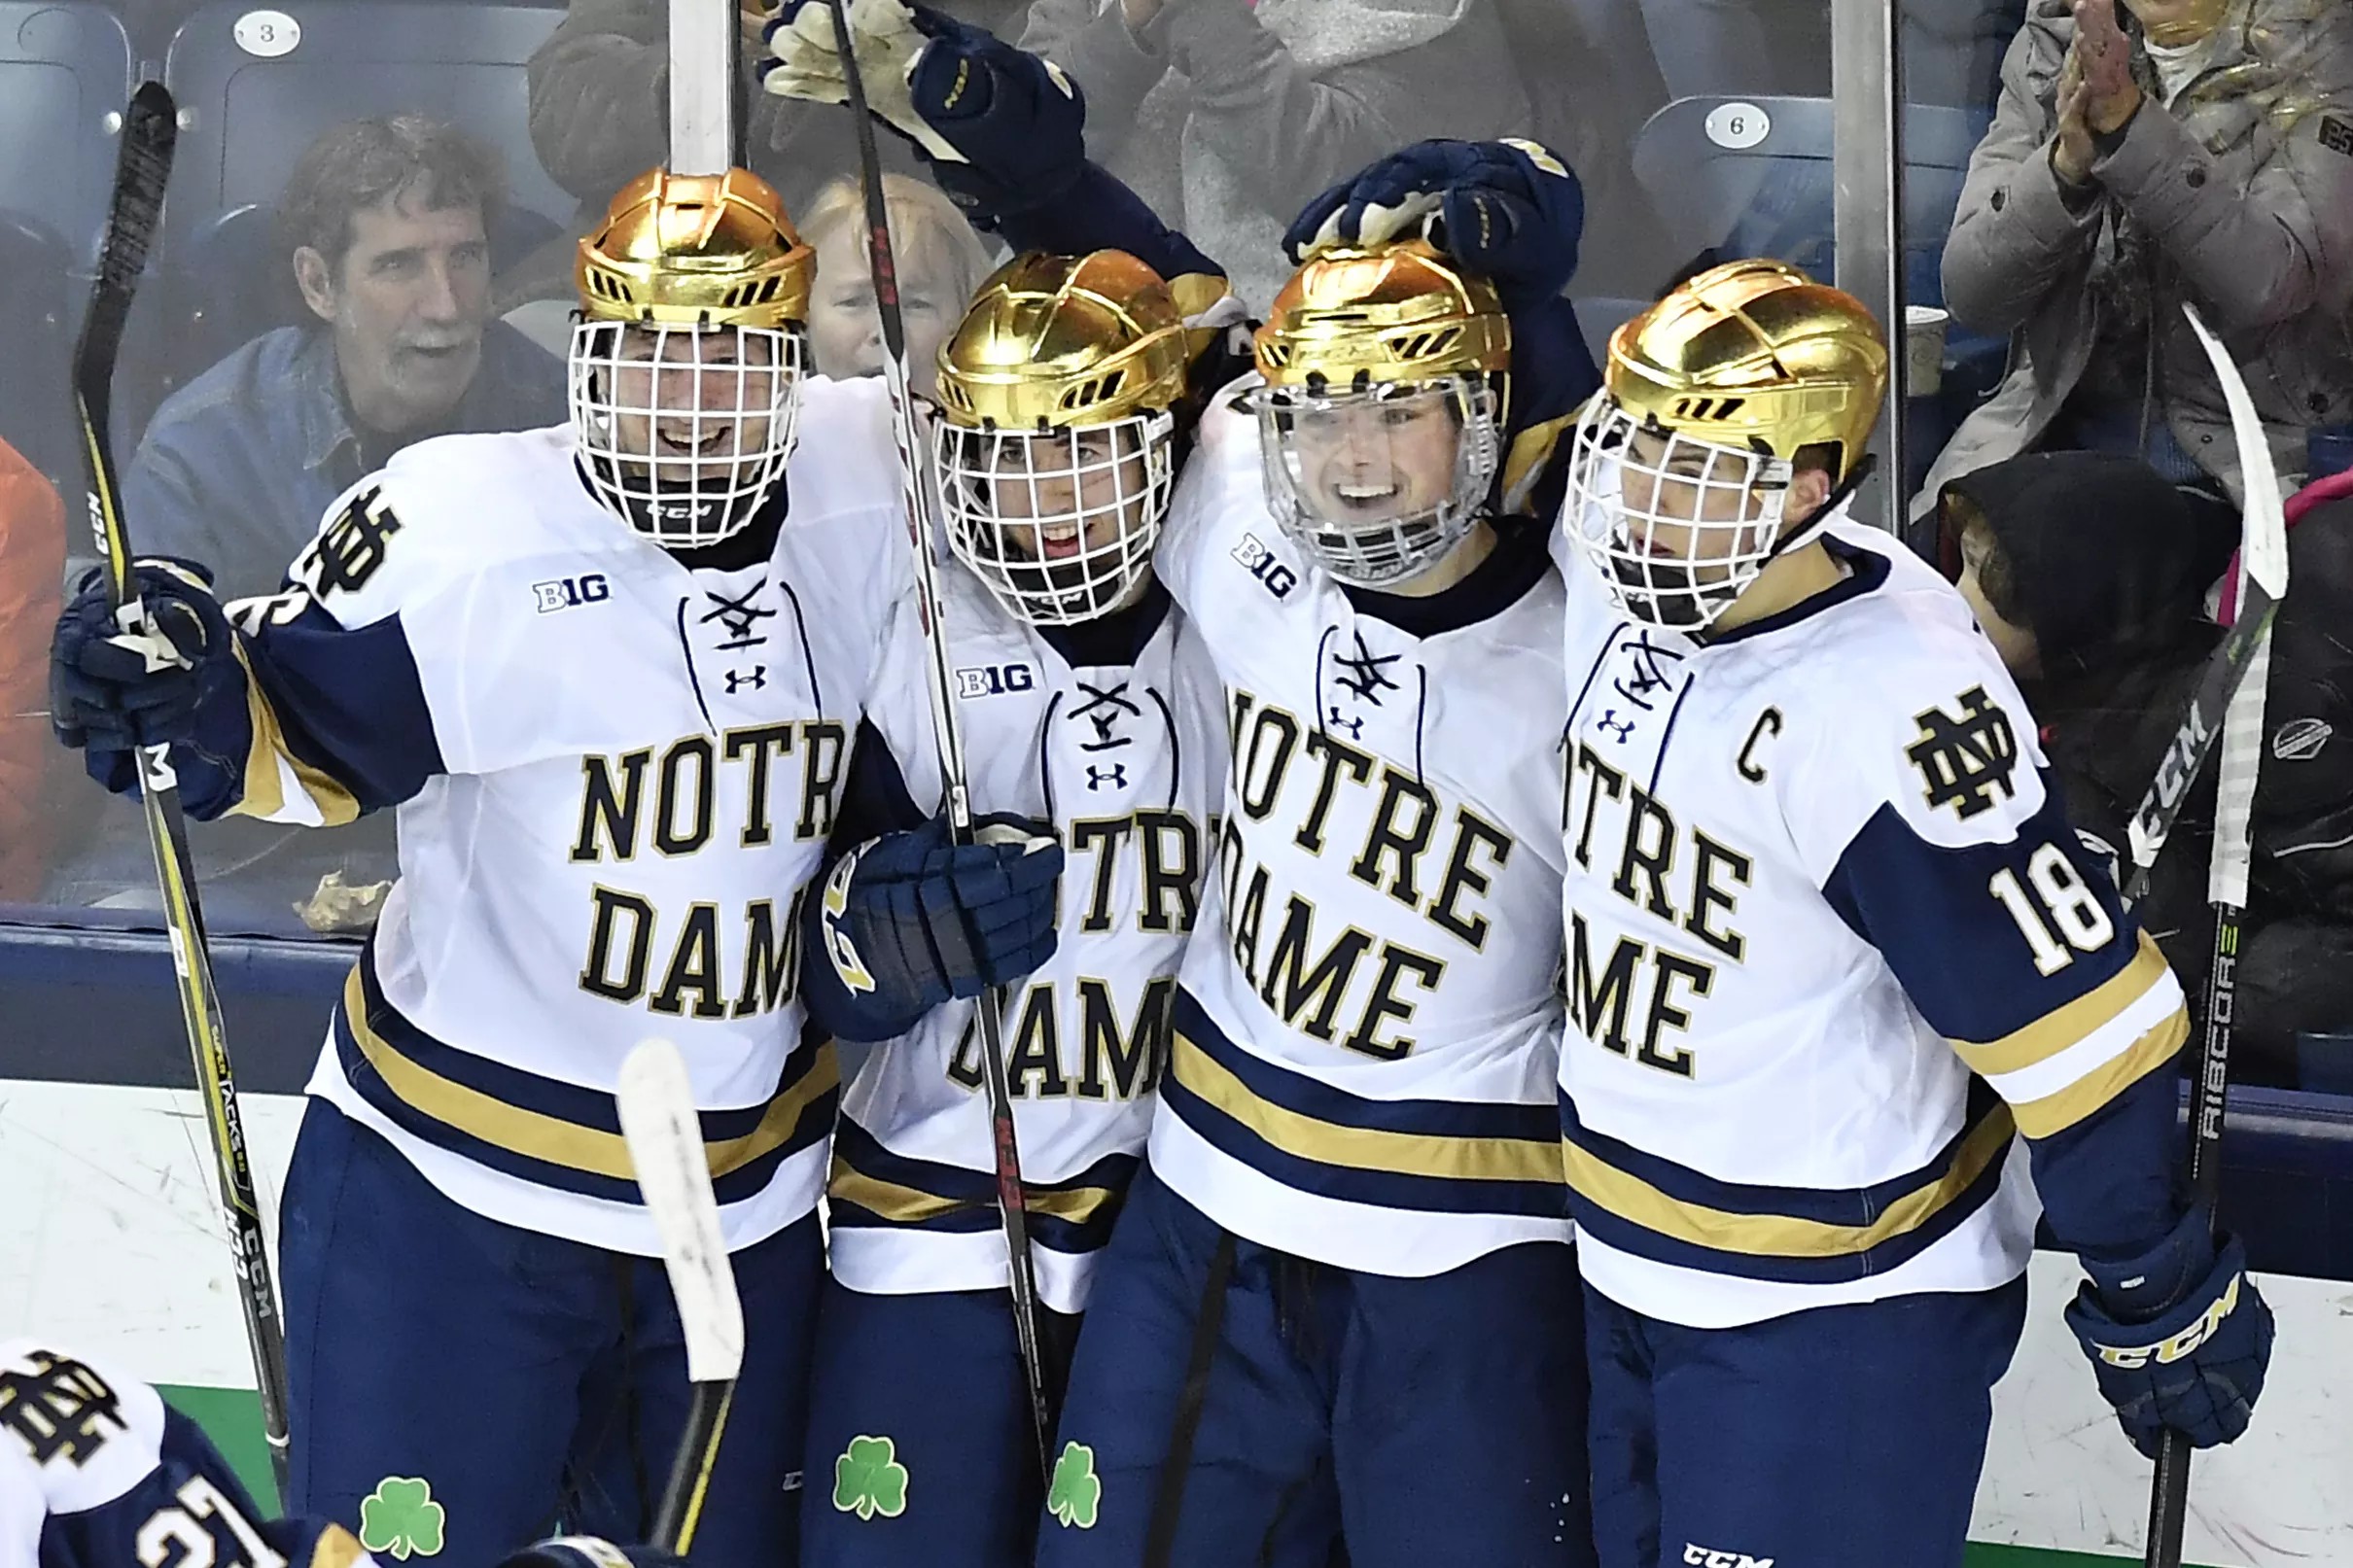 Which teams will make it to the Frozen Four in St. Paul?